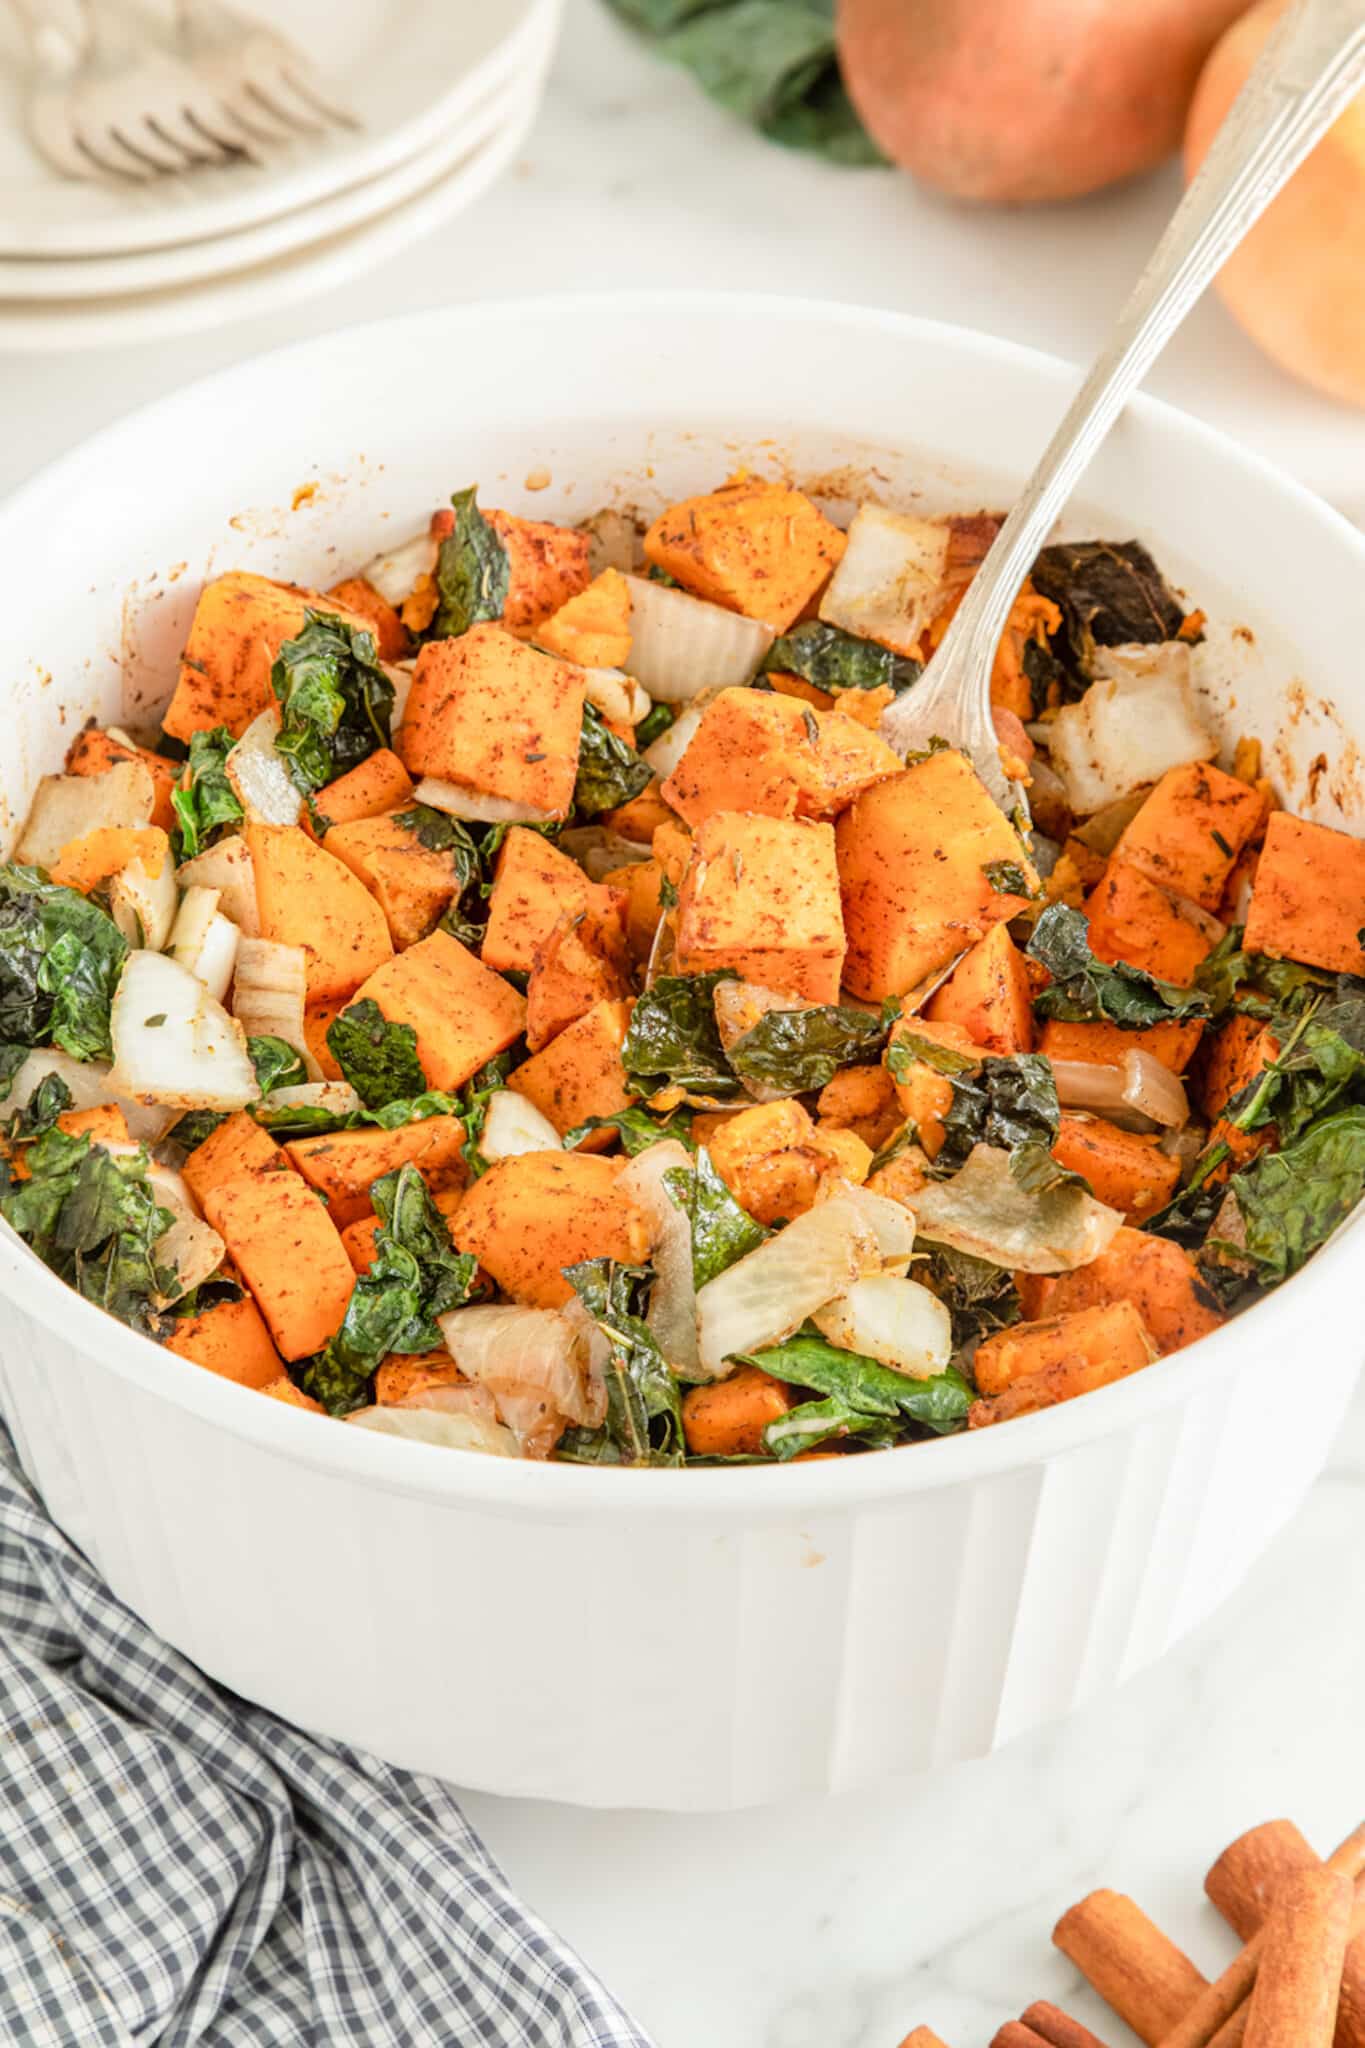 Large white ceramic bowl filled with baked kale and sweet potatoes, plus onion.